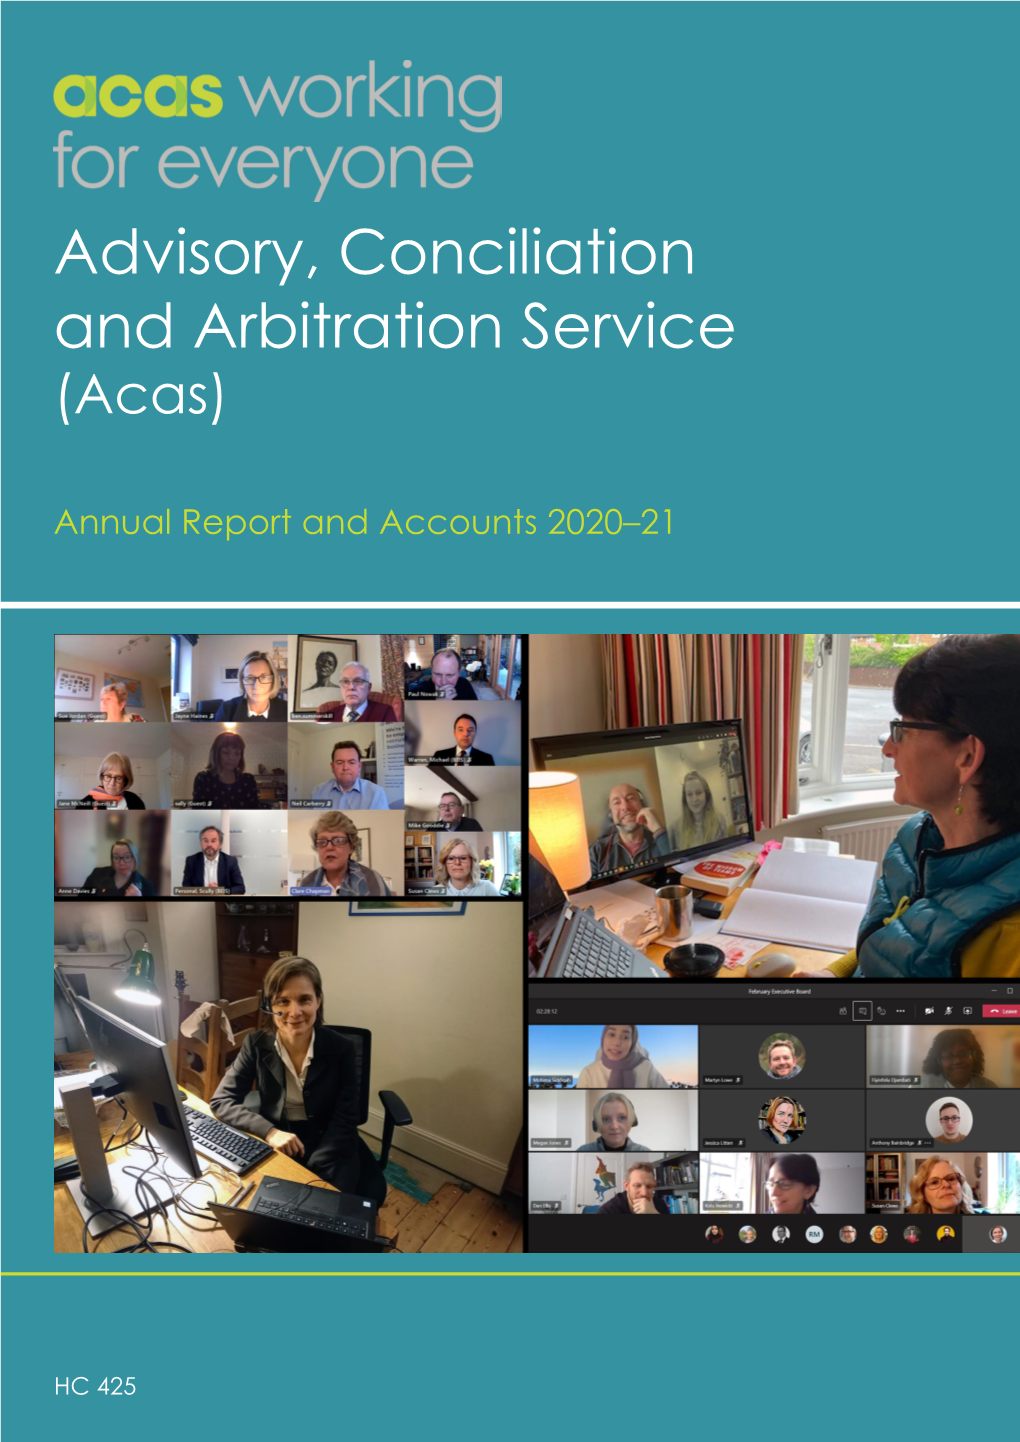 Acas Annual Report and Accounts 2020 to 2021